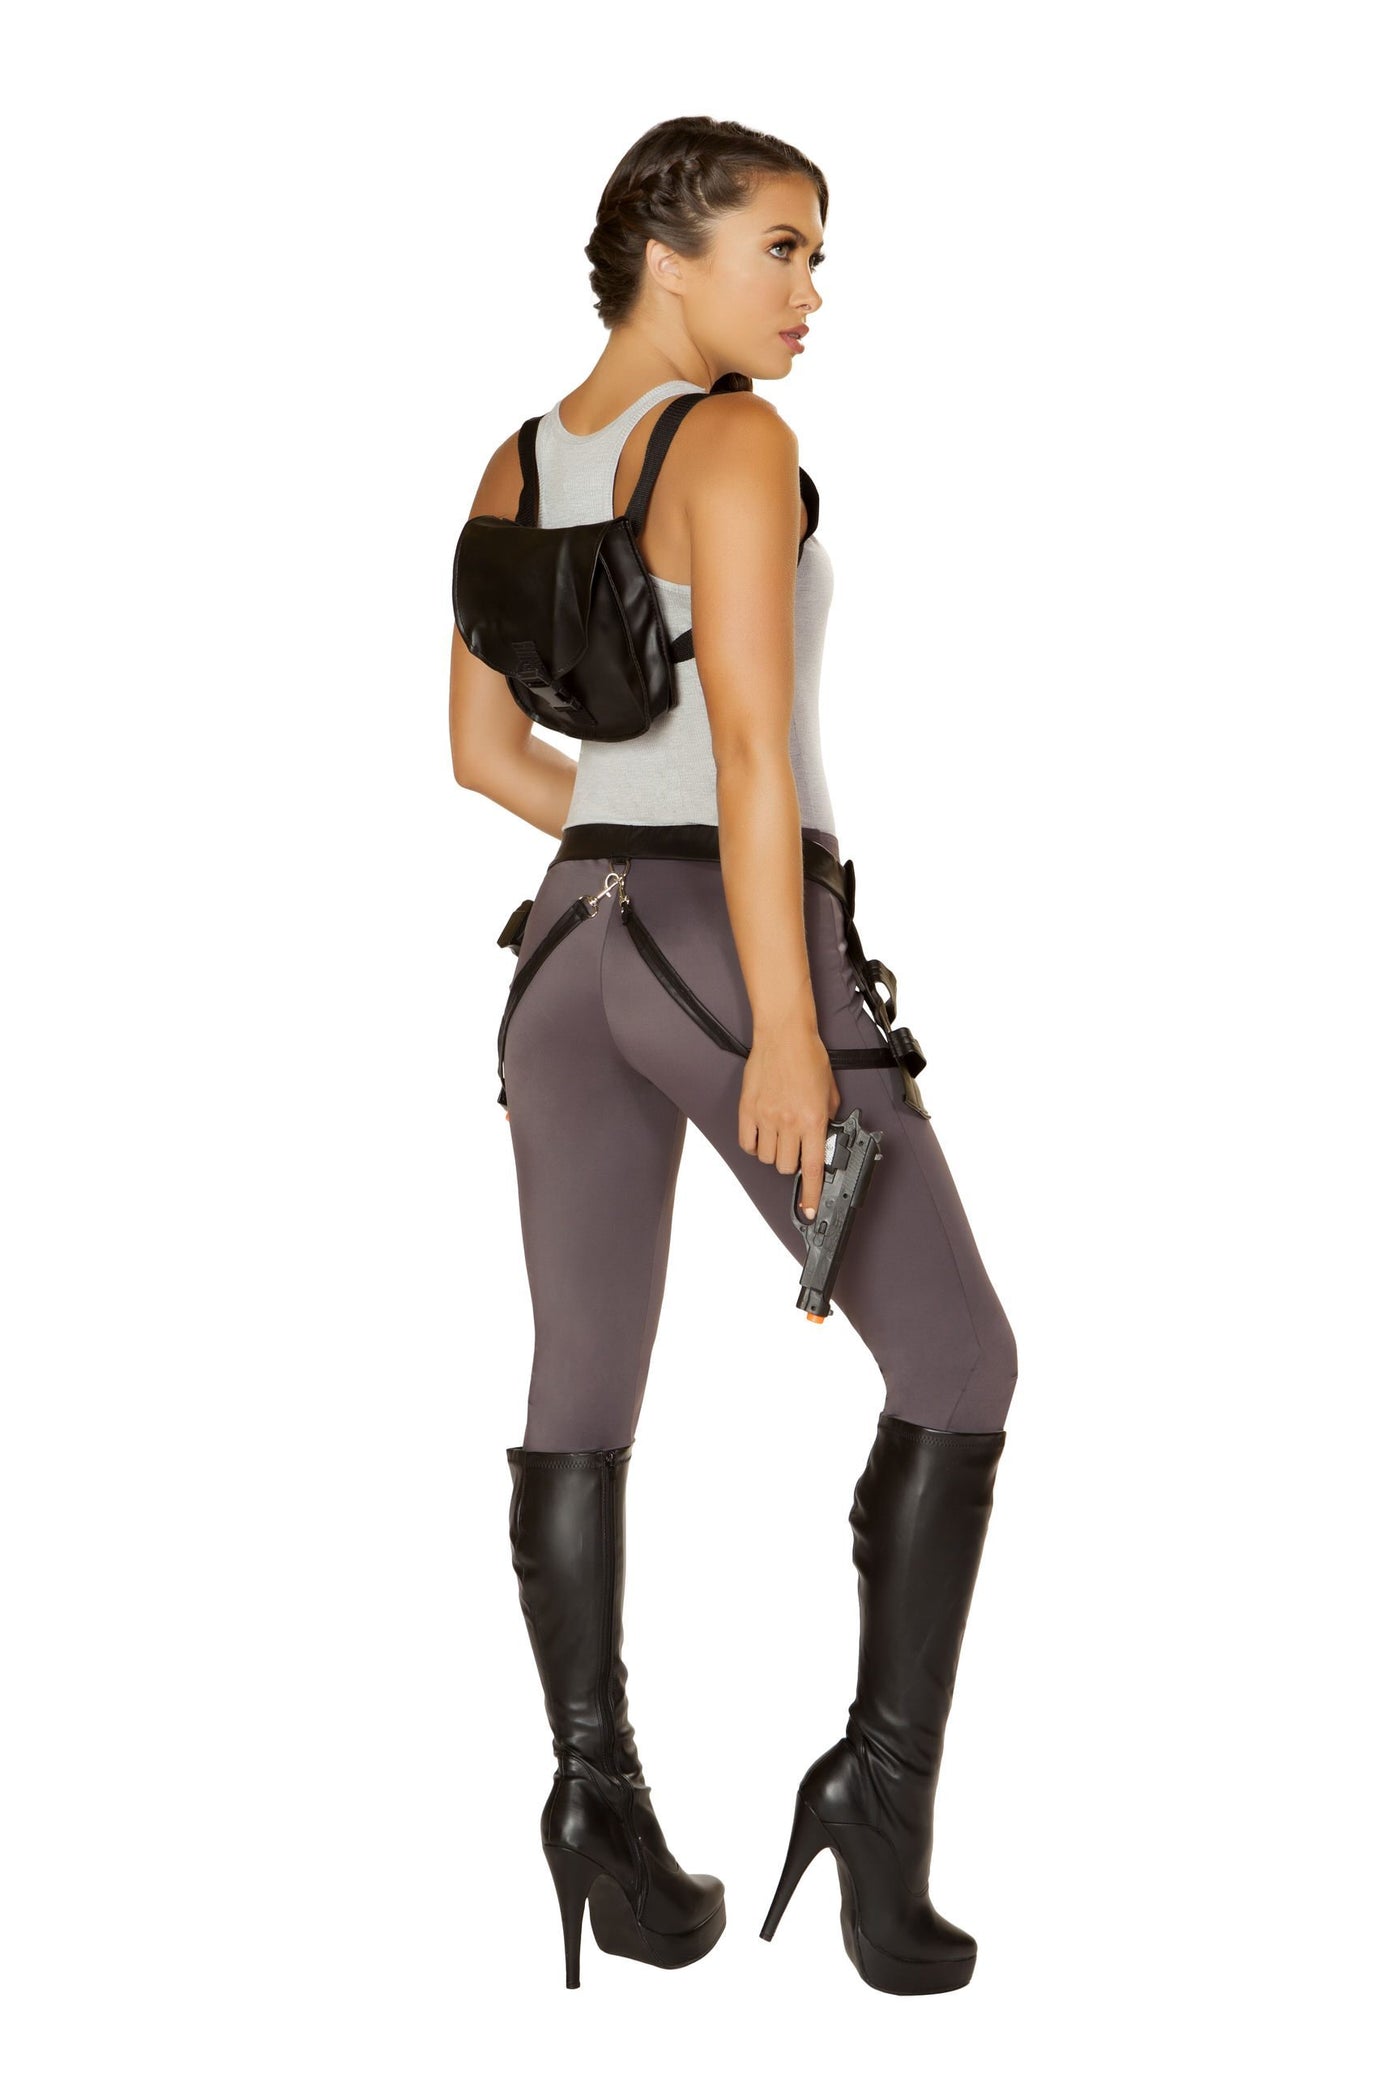 Buy 5pc Cyber Adventure from RomaRetailShop for 78.99 with Same Day Shipping Designed by Roma Costume 4847-AS-S